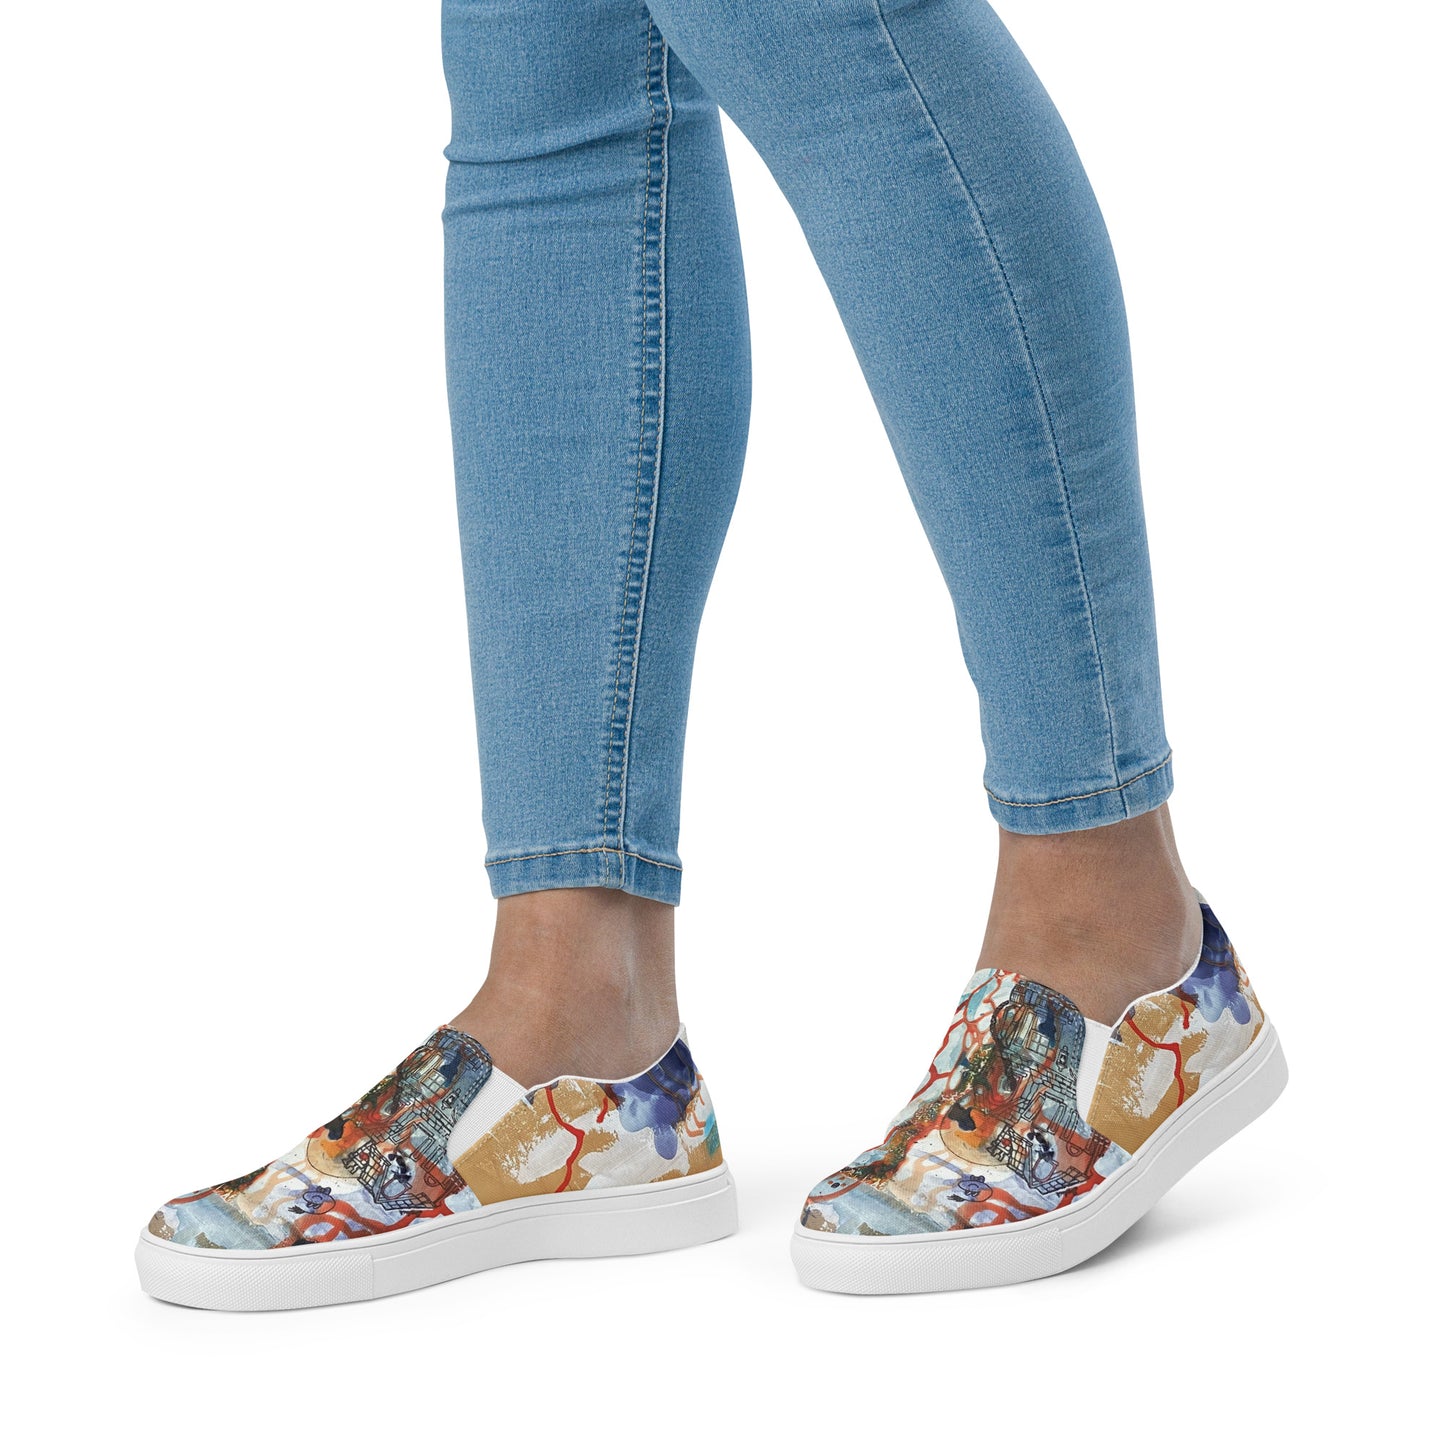 Chaussures slip-on en toile pour femme - Freedom